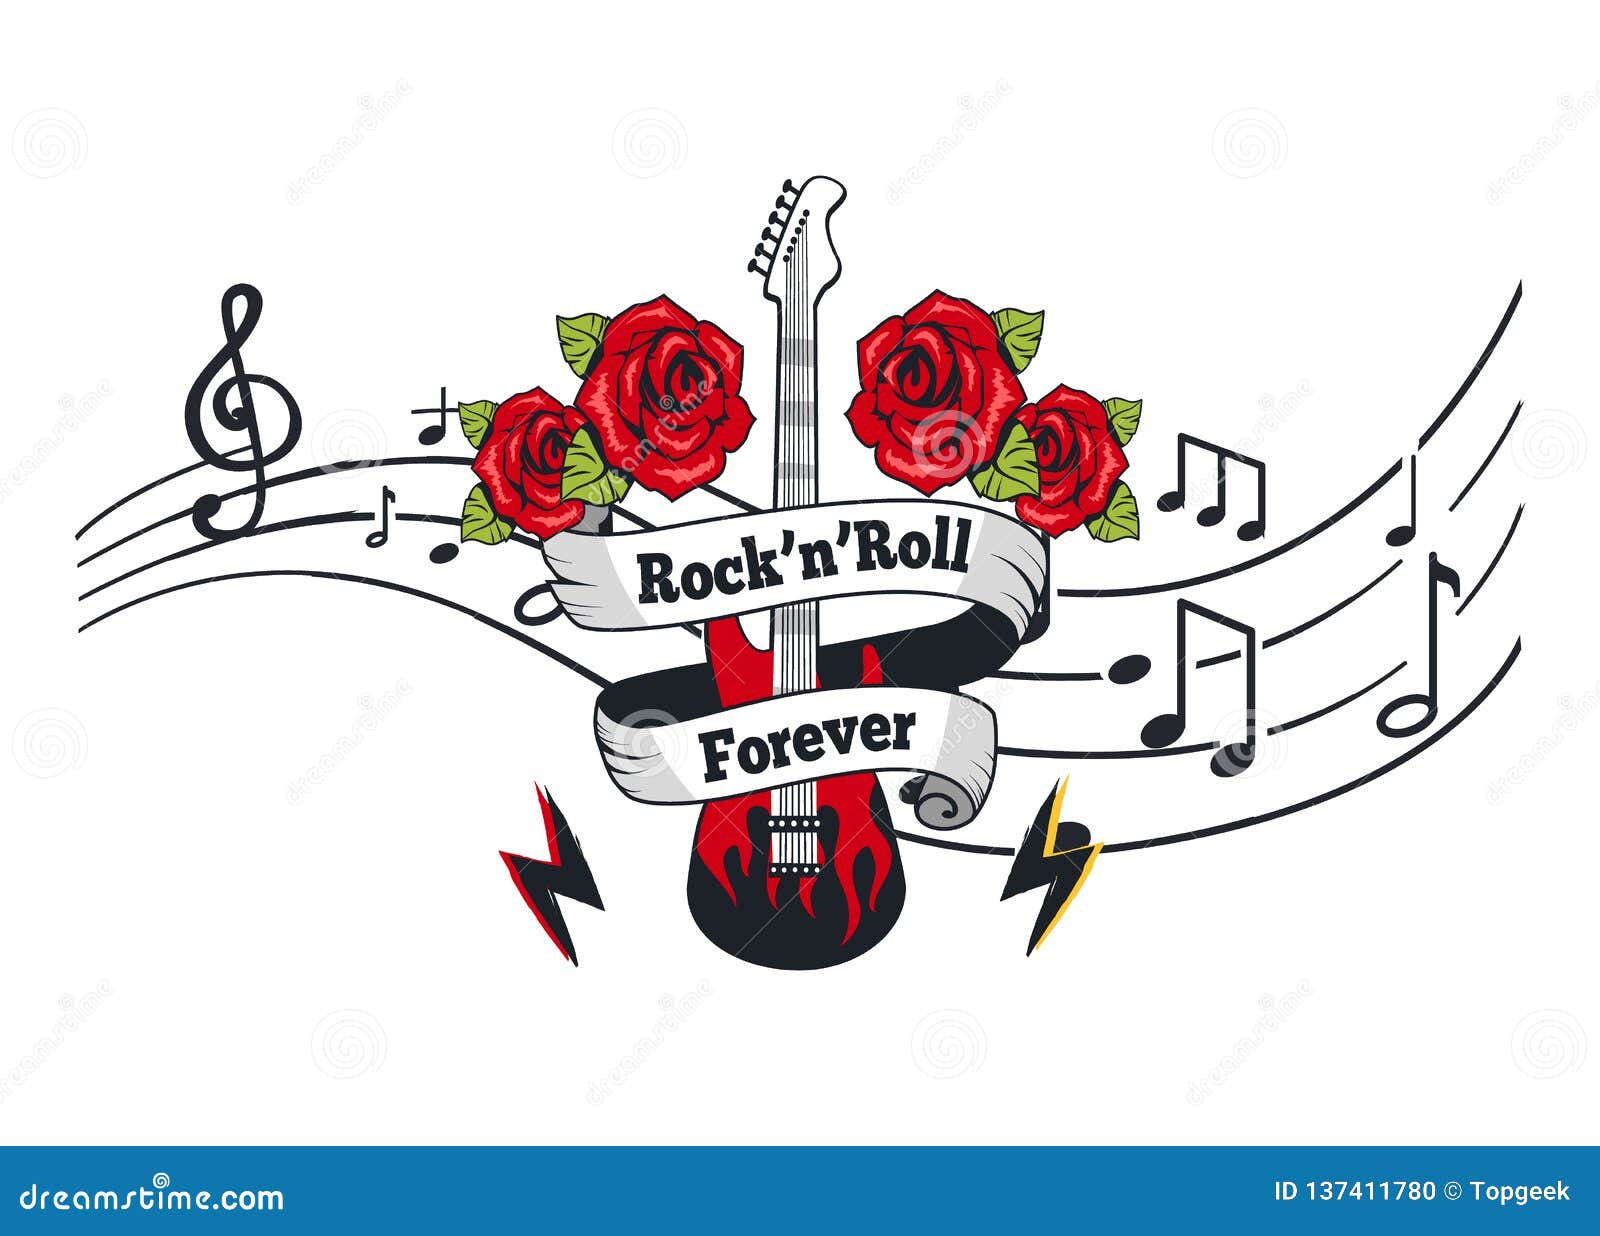 rock n roll forever, electric guitar with roses